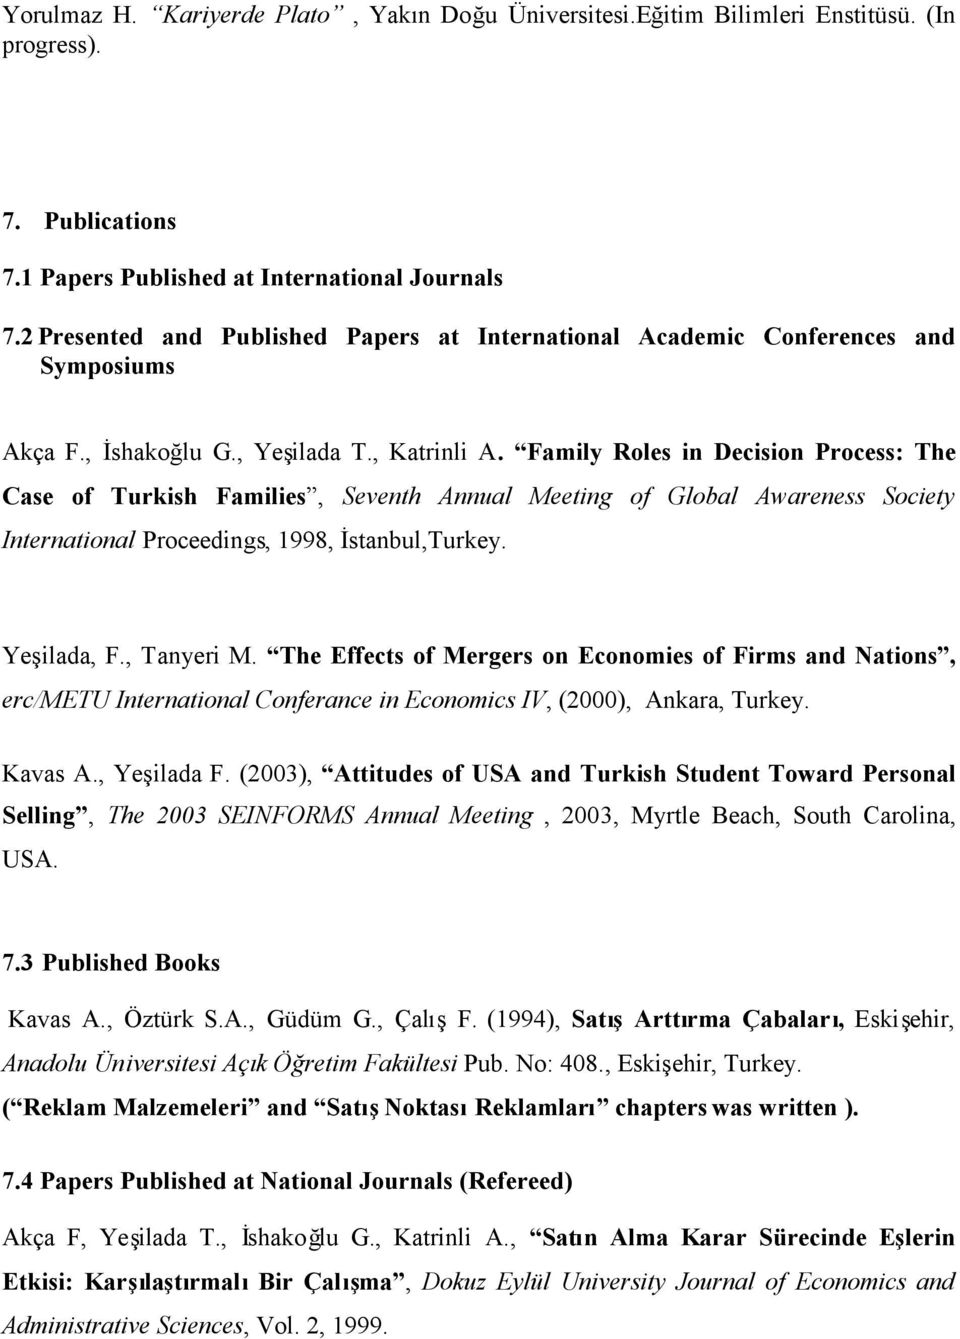 Family Roles in Decision Process: The Case of Turkish Families, Seventh Annual Meeting of Global Awareness Society International Proceedings, 1998, İstanbul,Turkey. Yeşilada, F., Tanyeri M.